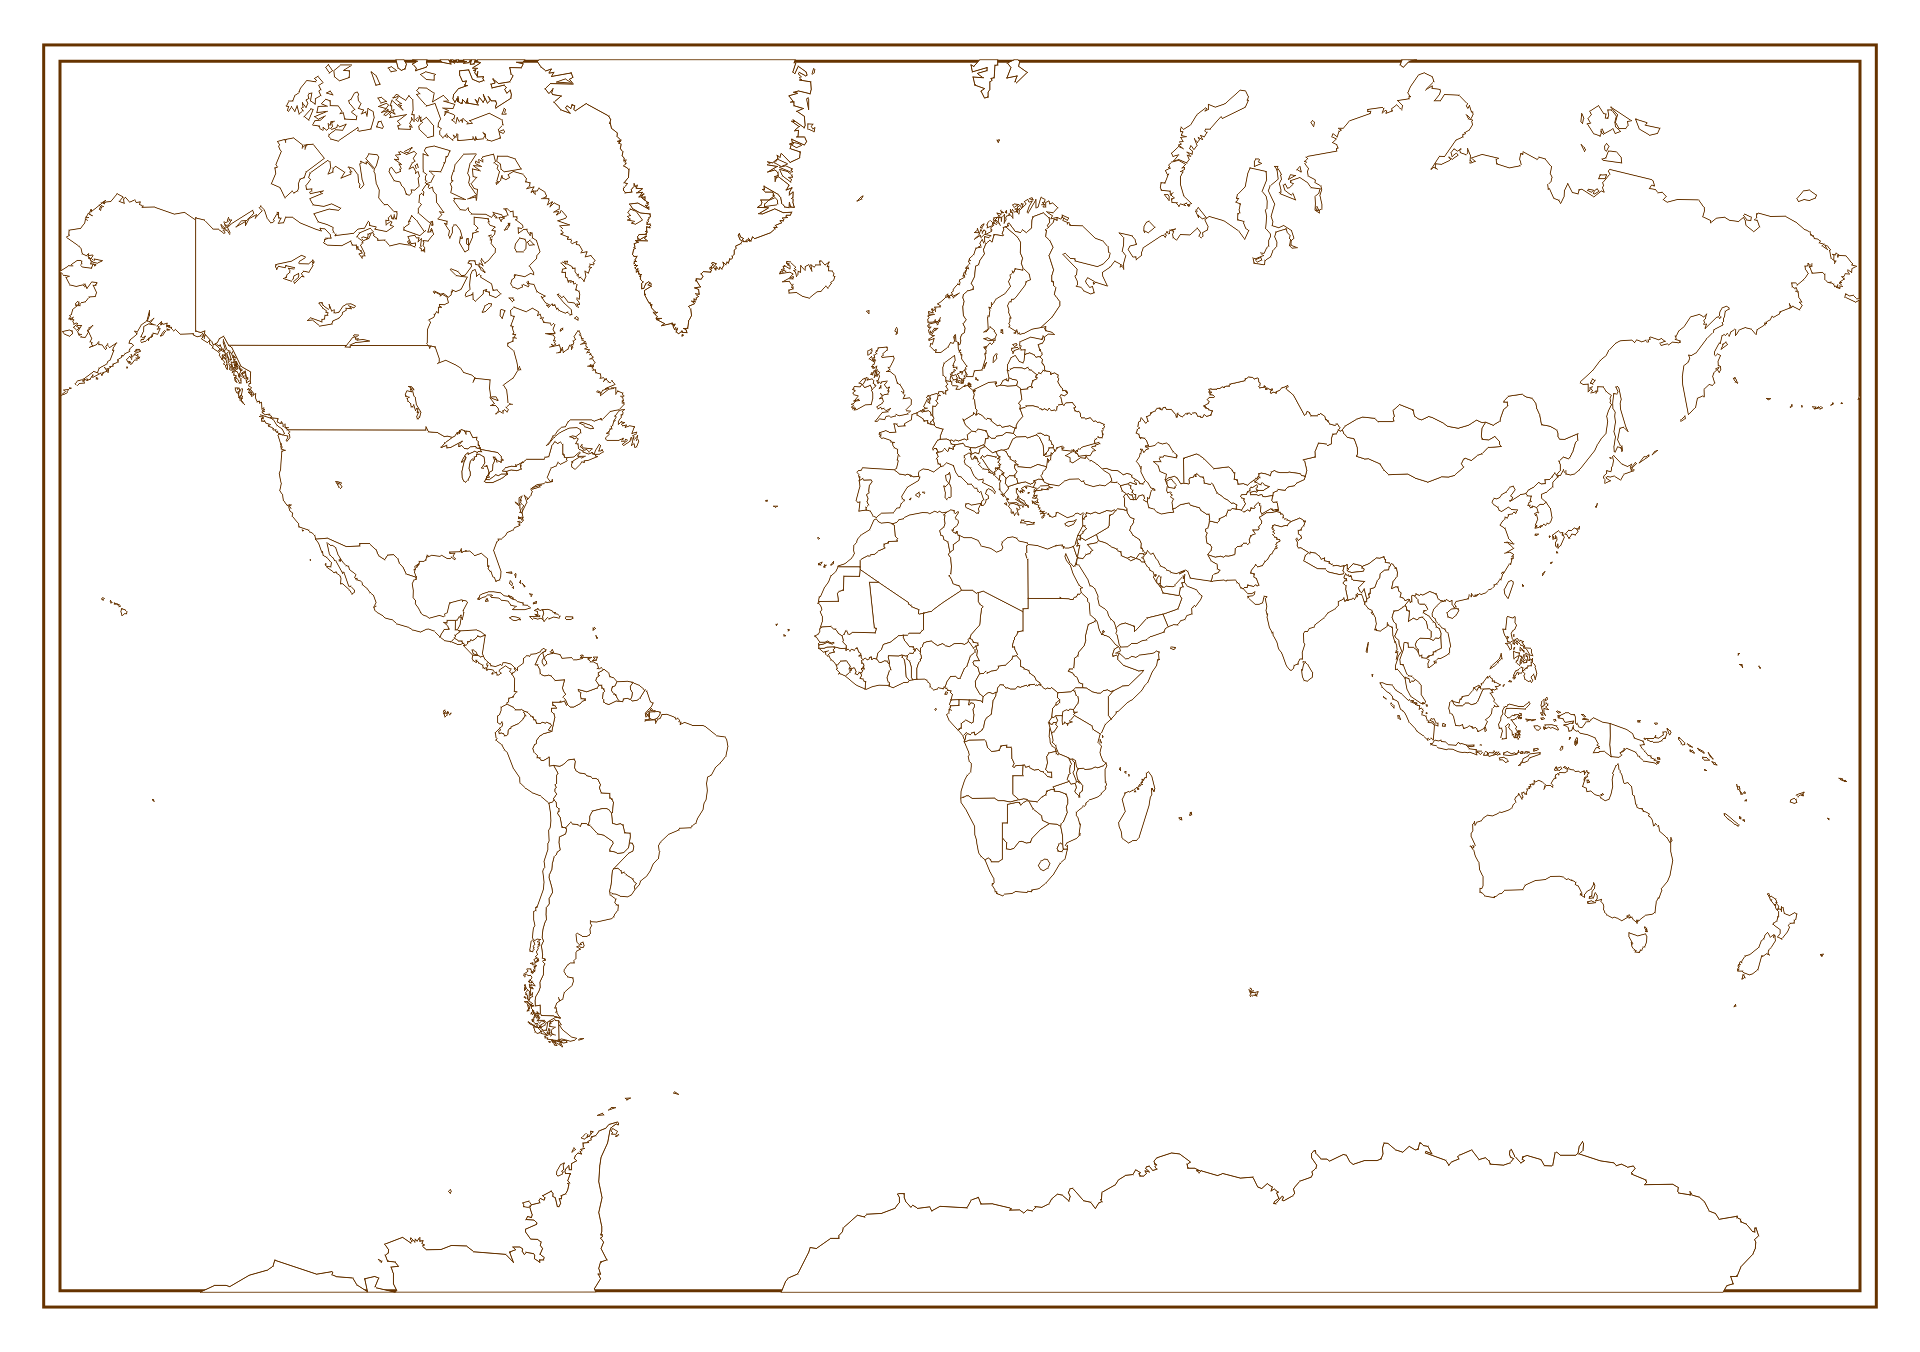 6-best-images-of-world-map-full-page-printable-full-page-printable-world-map-full-page